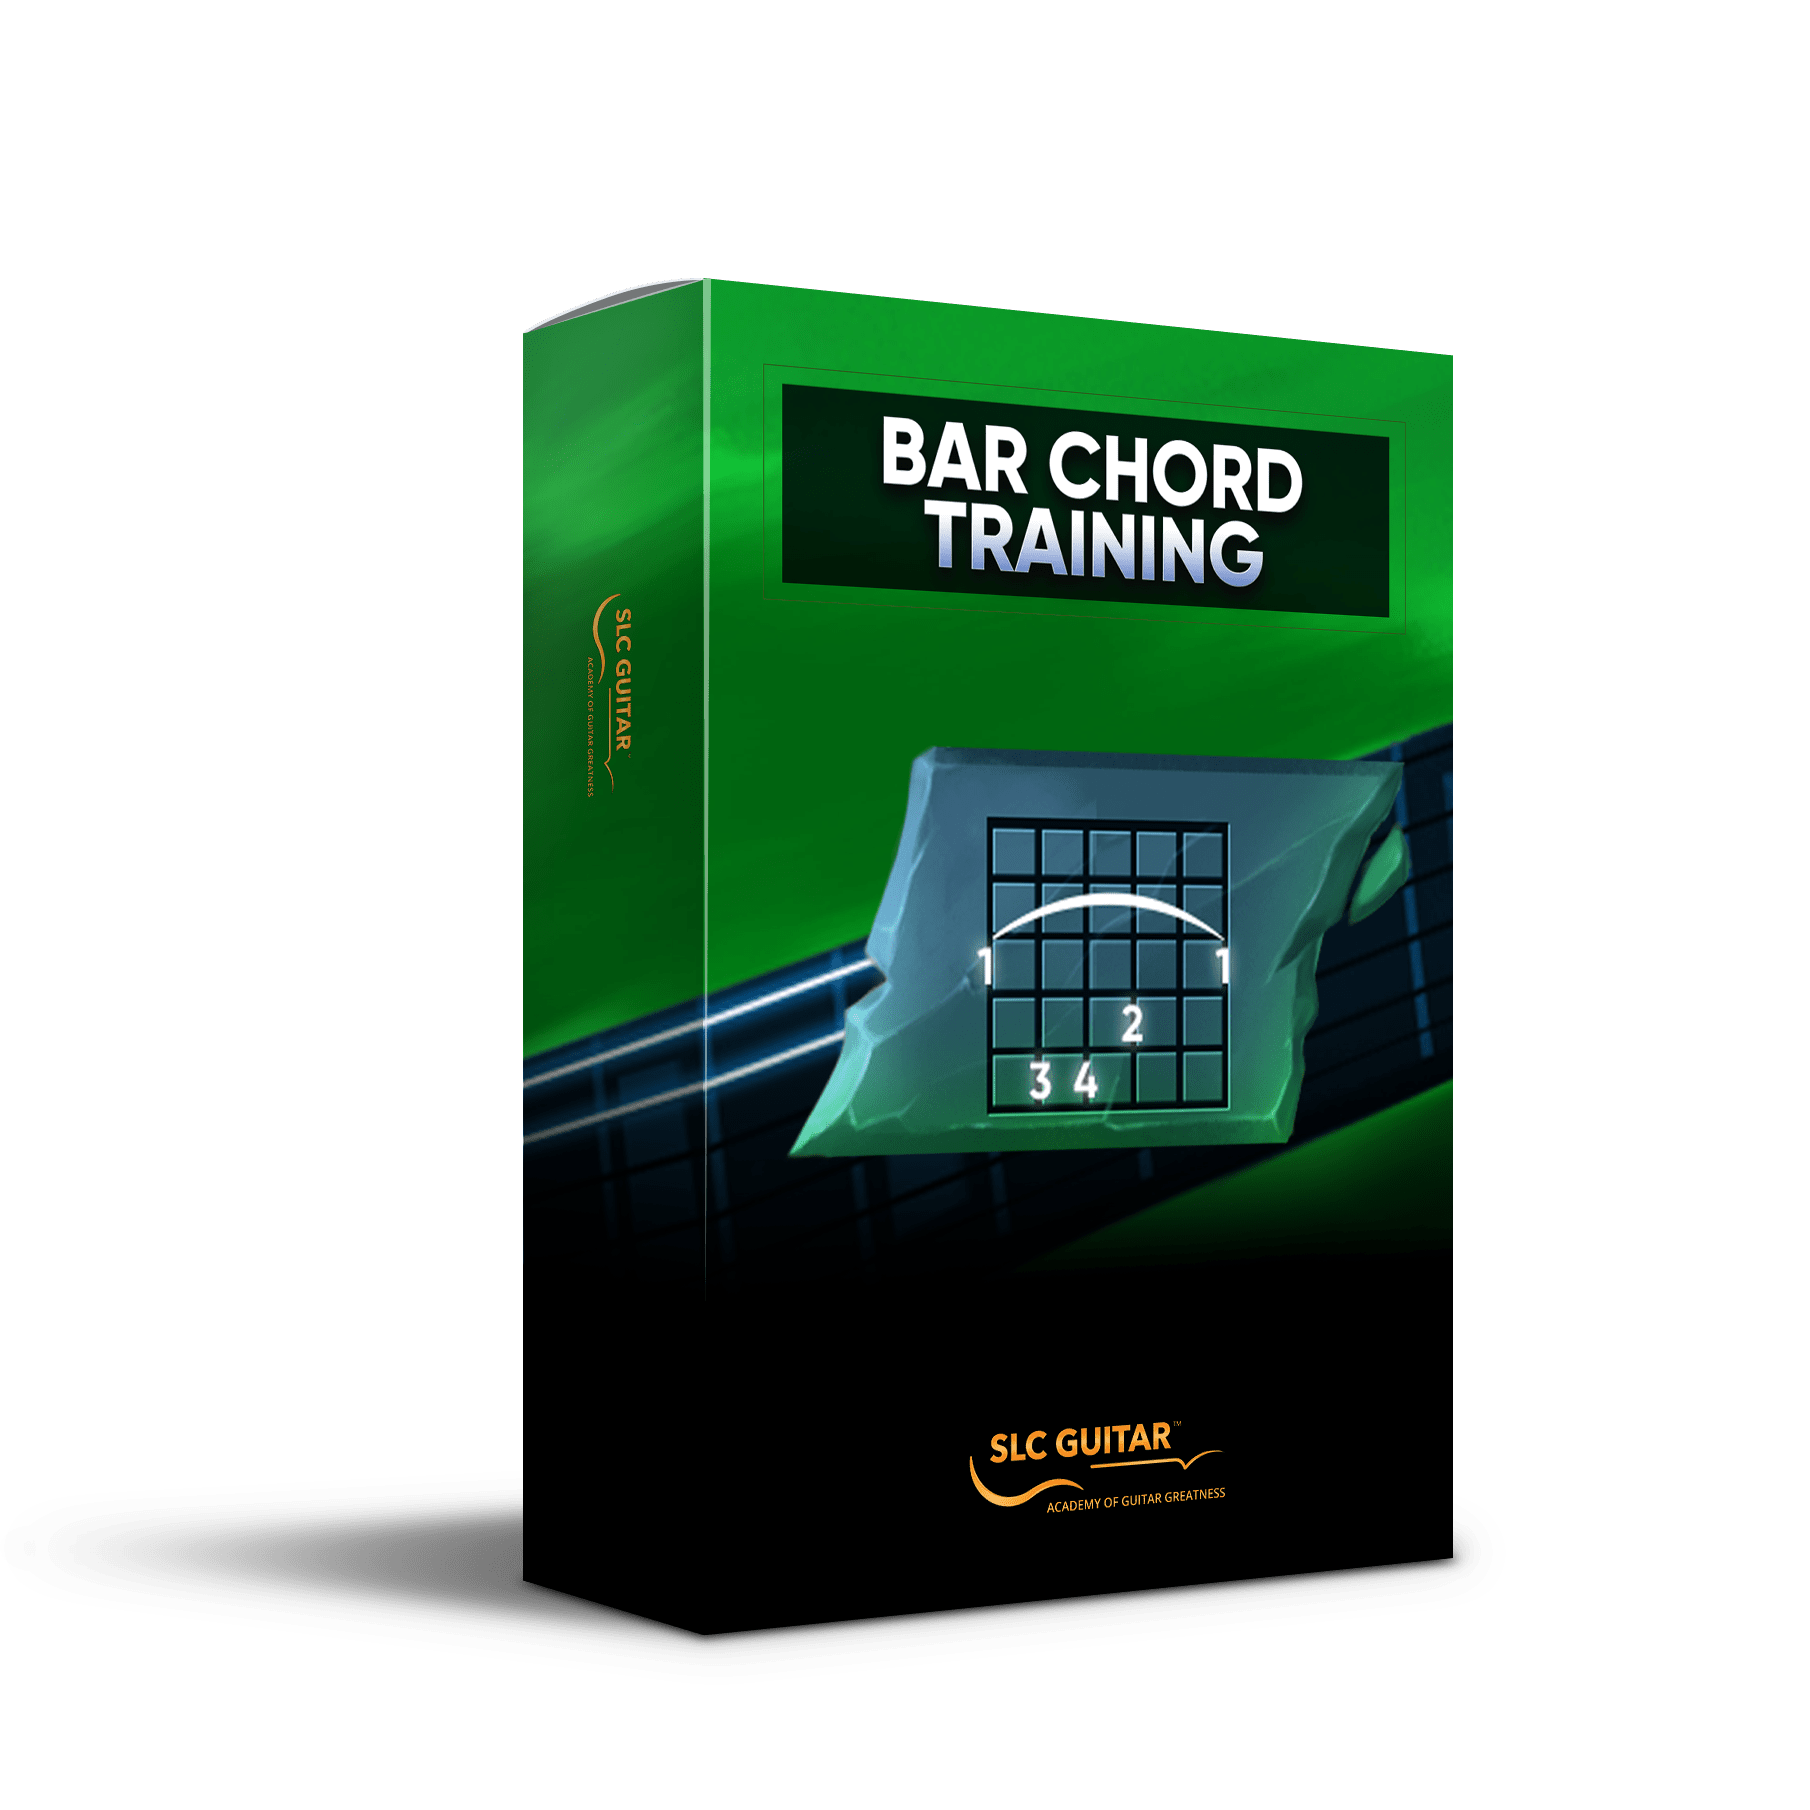 Digital Image of Bar Chord Training Course By SLC Guitar